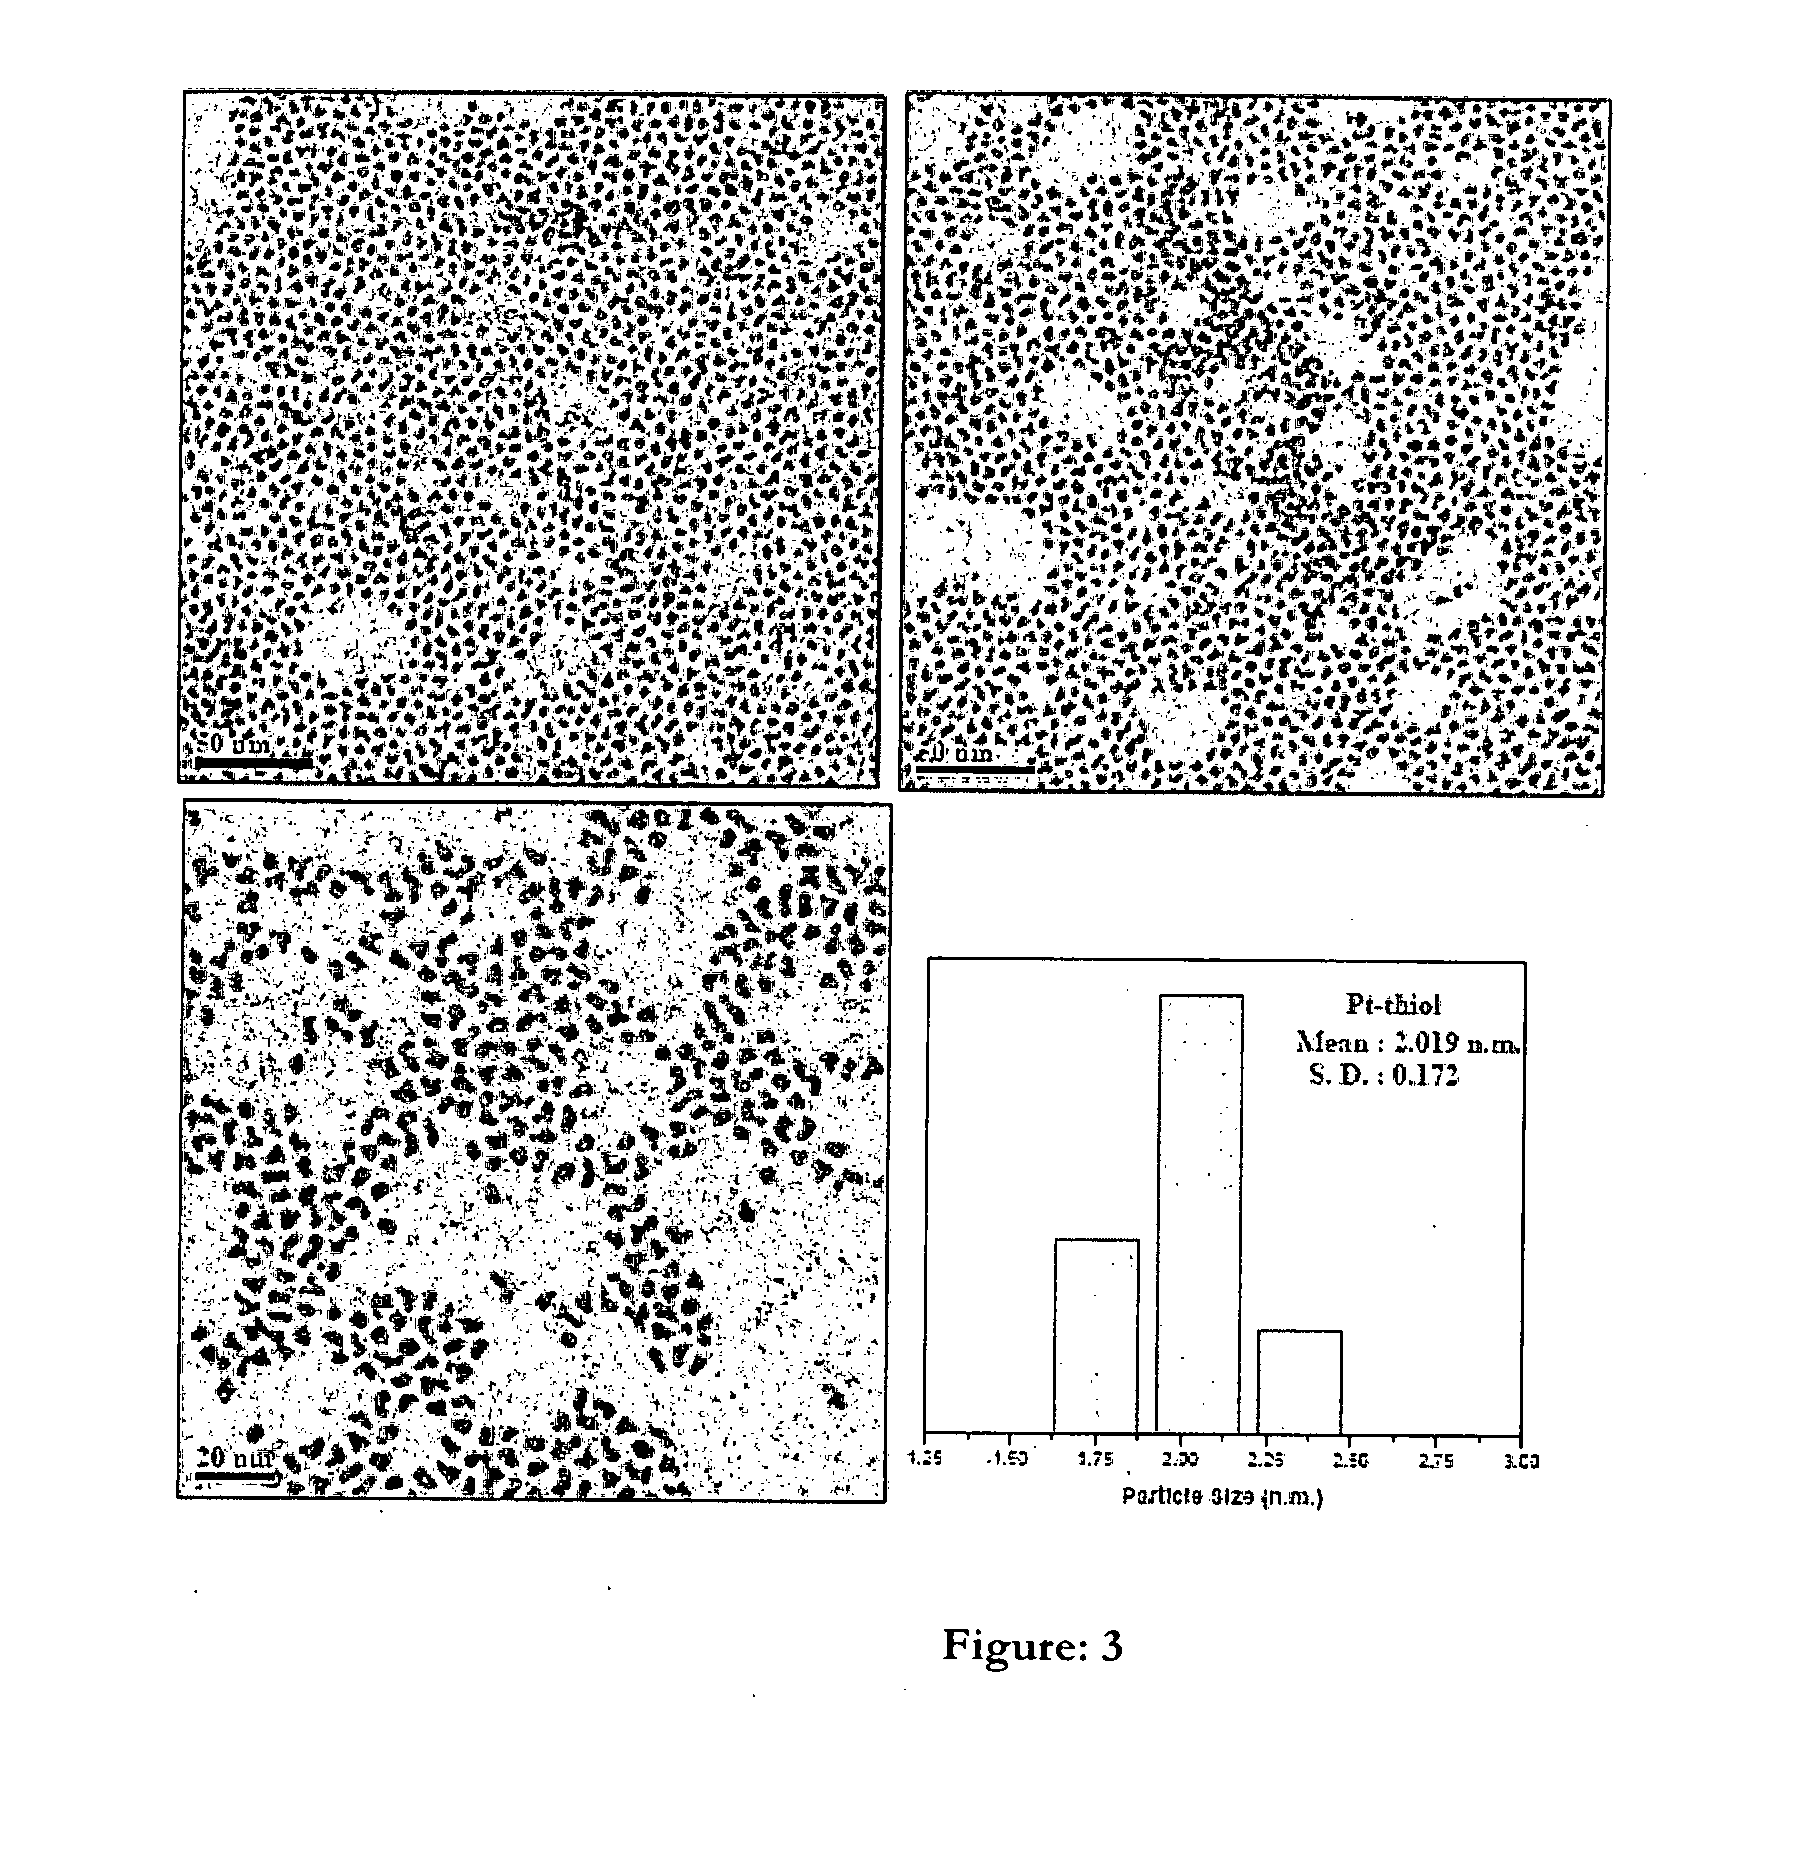 One pot process for the preparation of ultra-small size transition metal nonoparticles